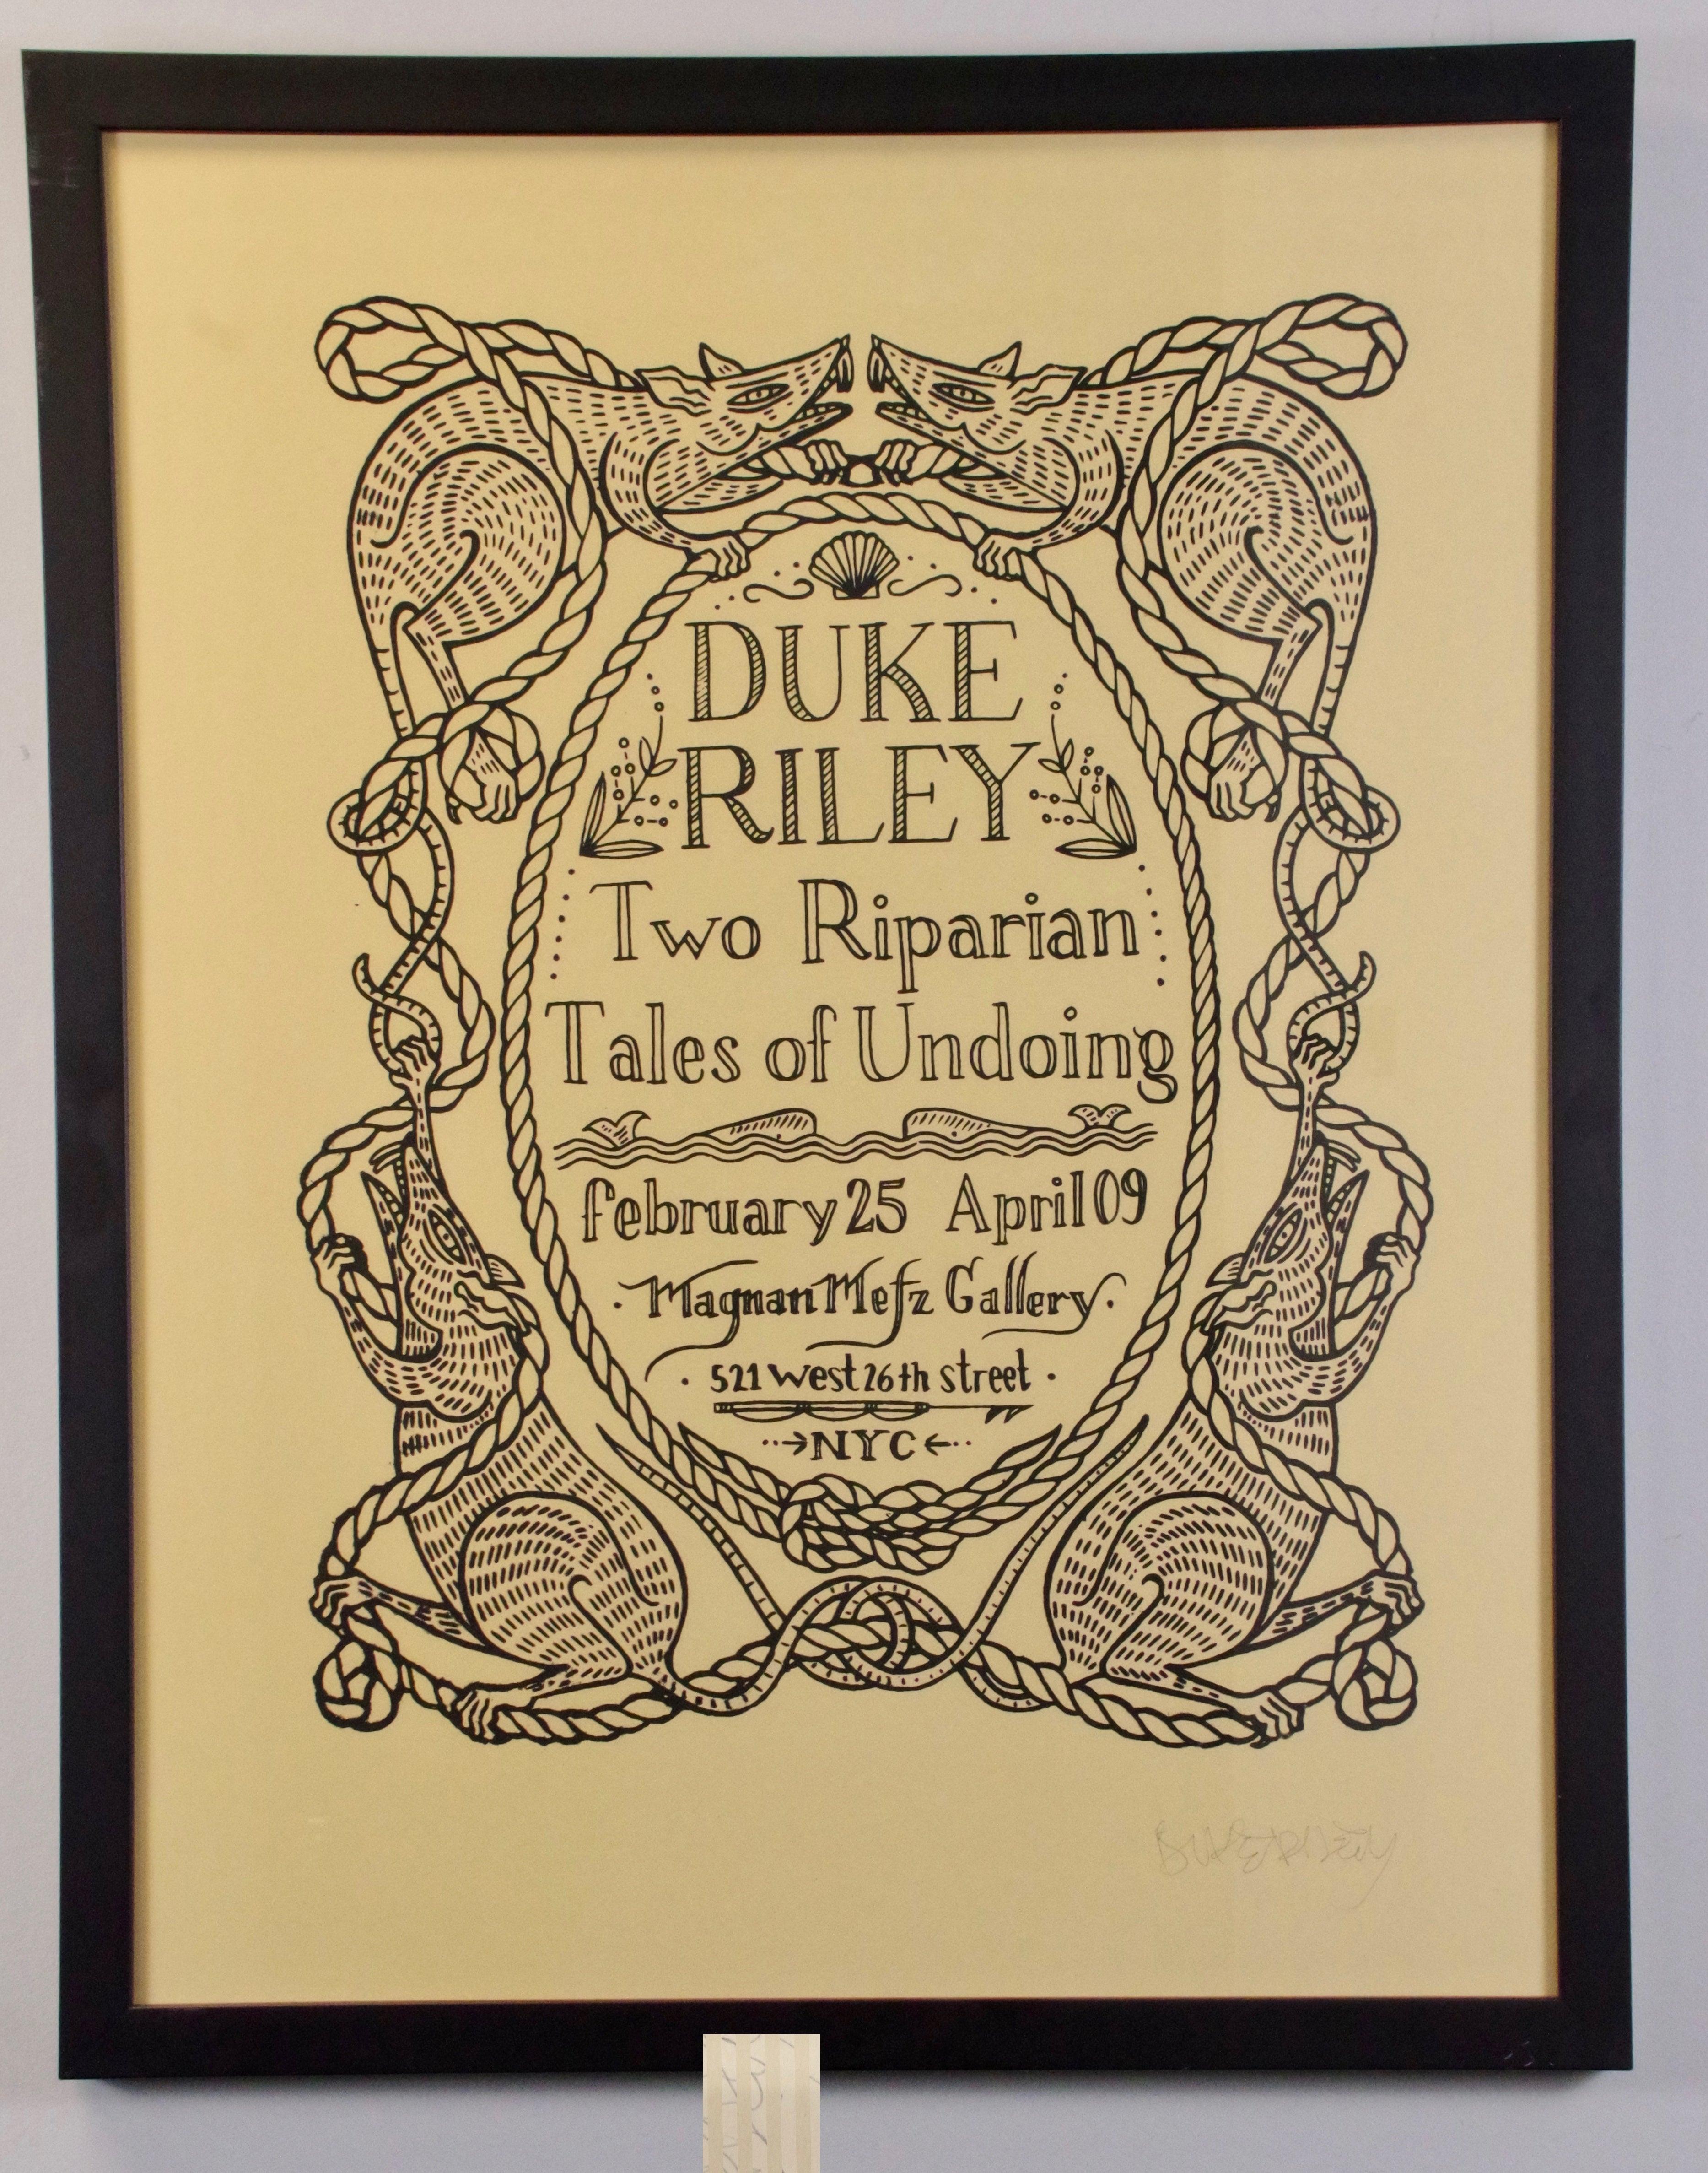 Paper Size: 32 x 24 inches ( 81.28 x 60.96 cm )
Image Size: 32 x 24 inches ( 81.28 x 60.96 cm )
Framed: Yes
Condition: A-: Near Mint, very light signs of handling

Additional Details: Exhibition poster for Duke Riley's one man show at Magnan Metz